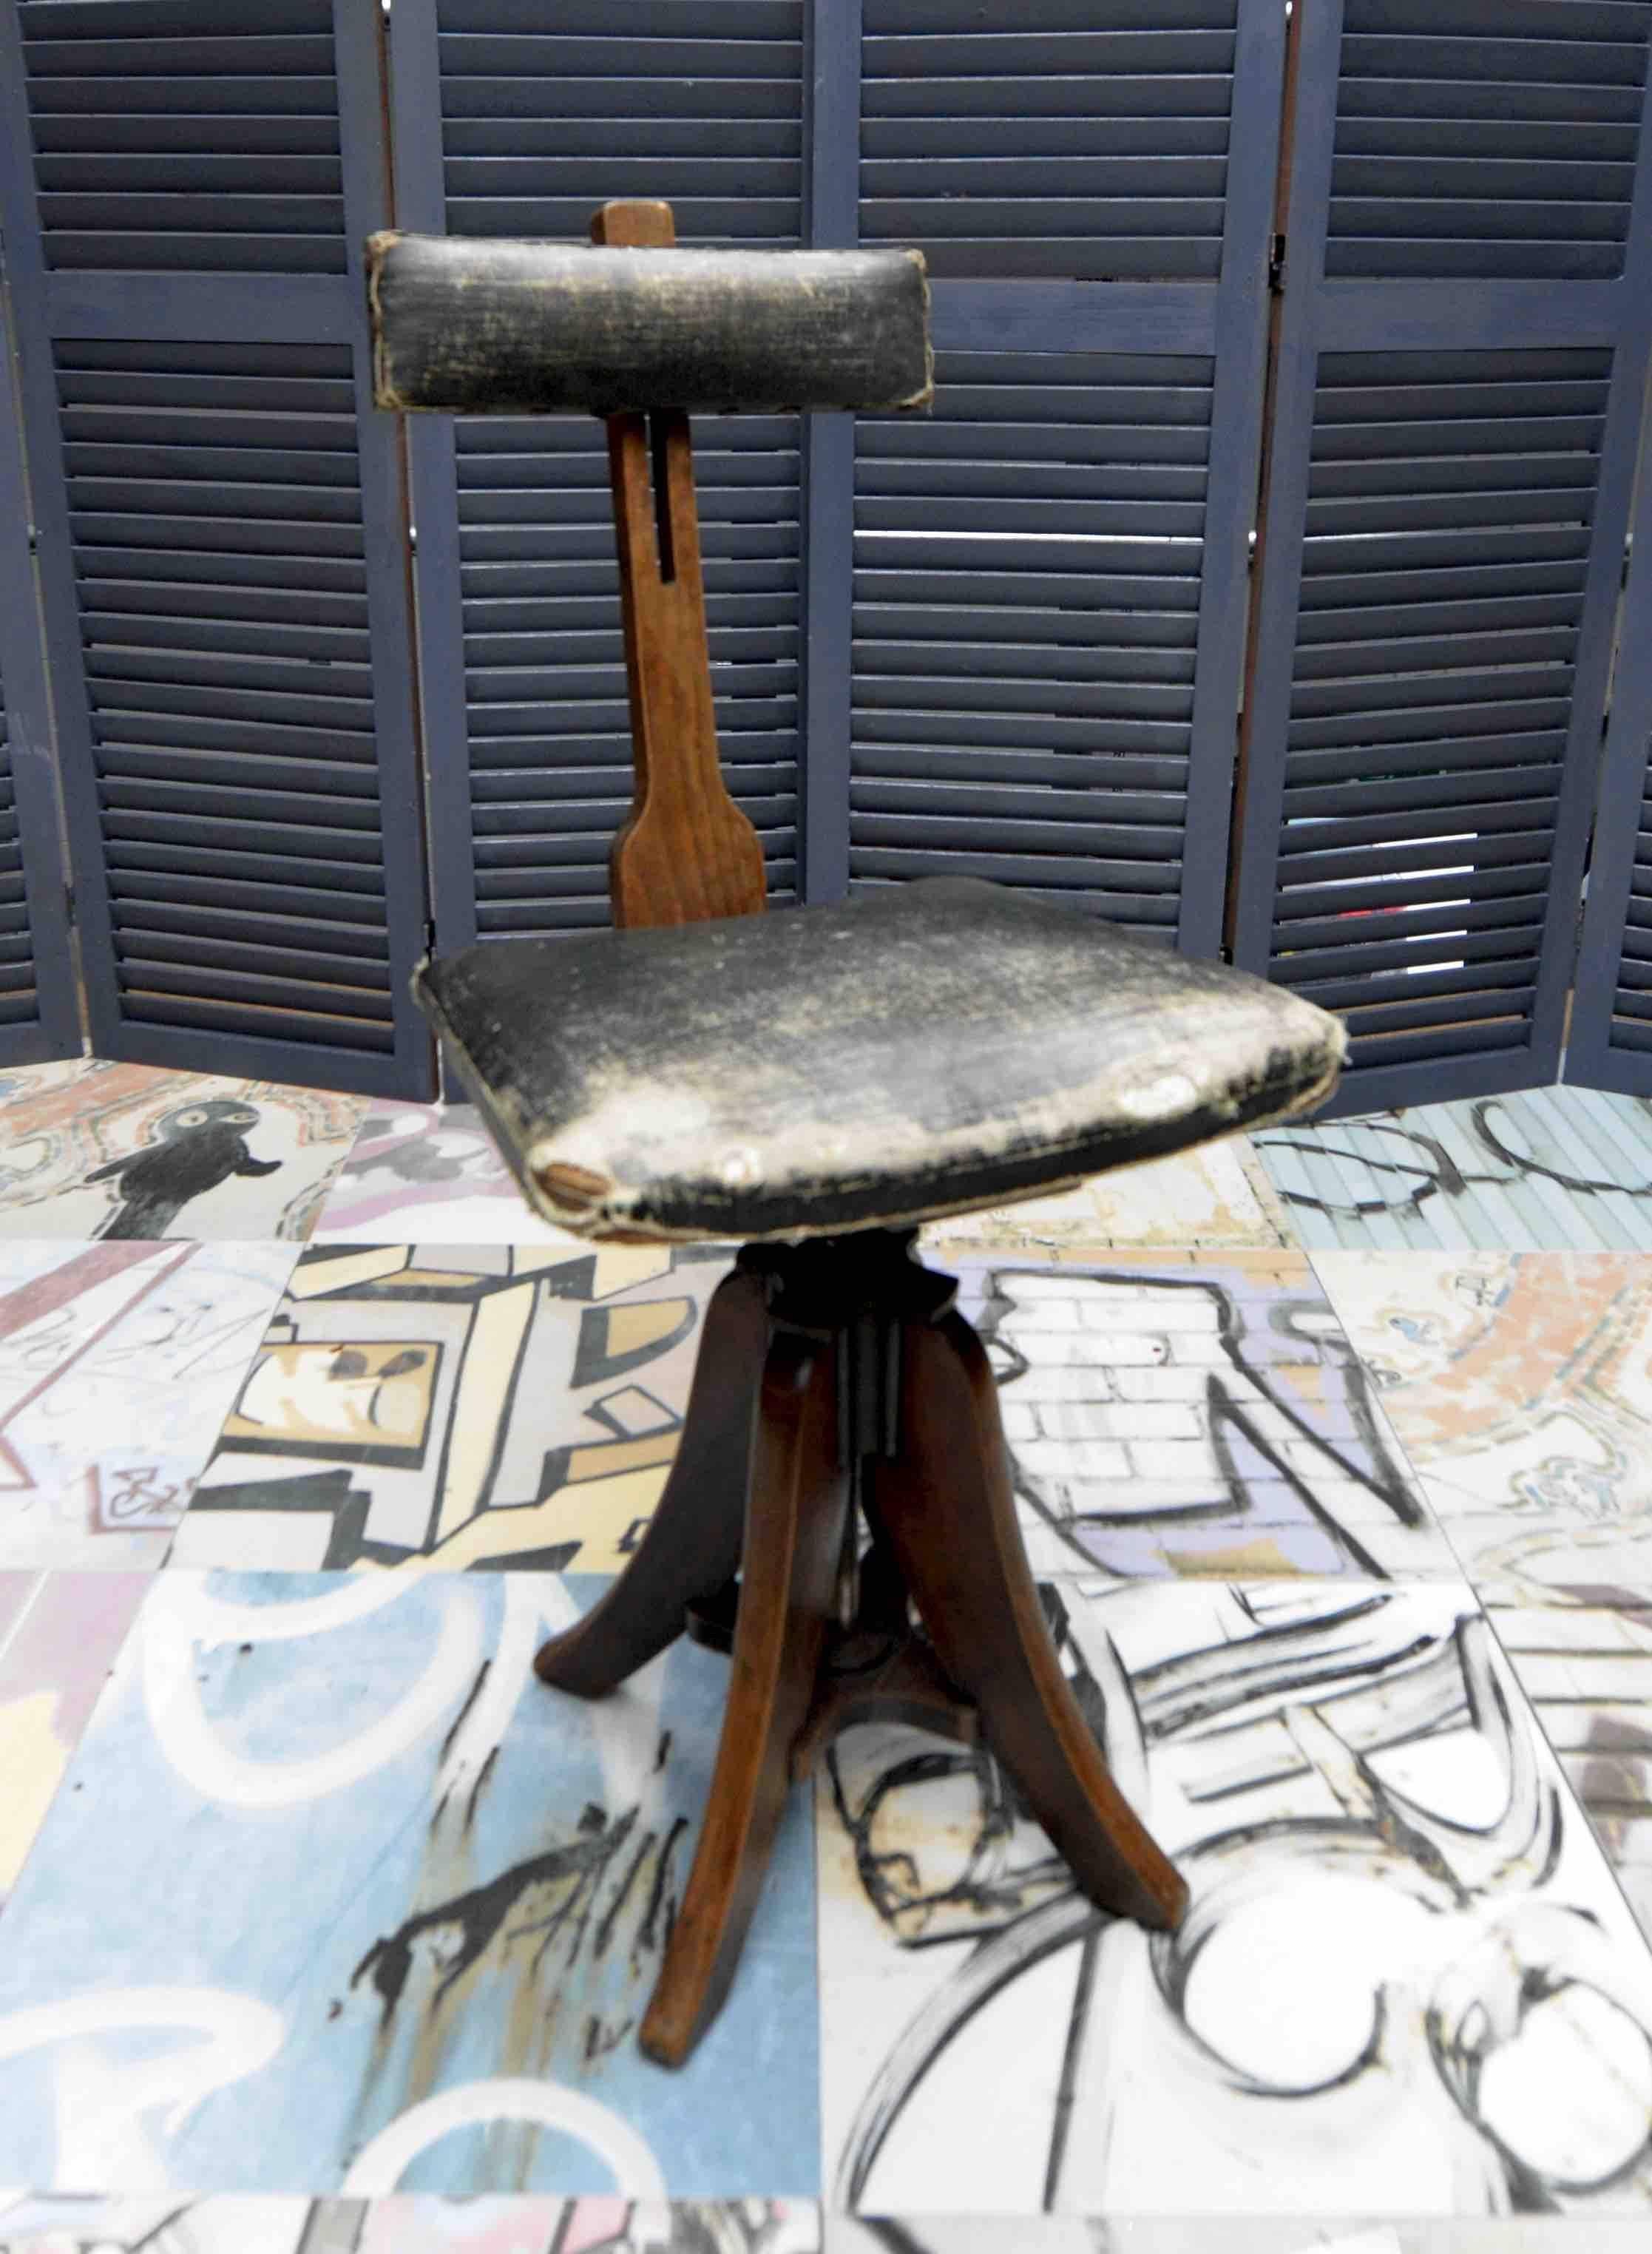 If shipped to the US or EU, no import tax applies. 

This is an English artist's/ draughtsman’s chair from the late 19th century with adjustable backrest and swivel seat. Stamped with 'Glenister High Wycombe' numbered 43, this chair features its